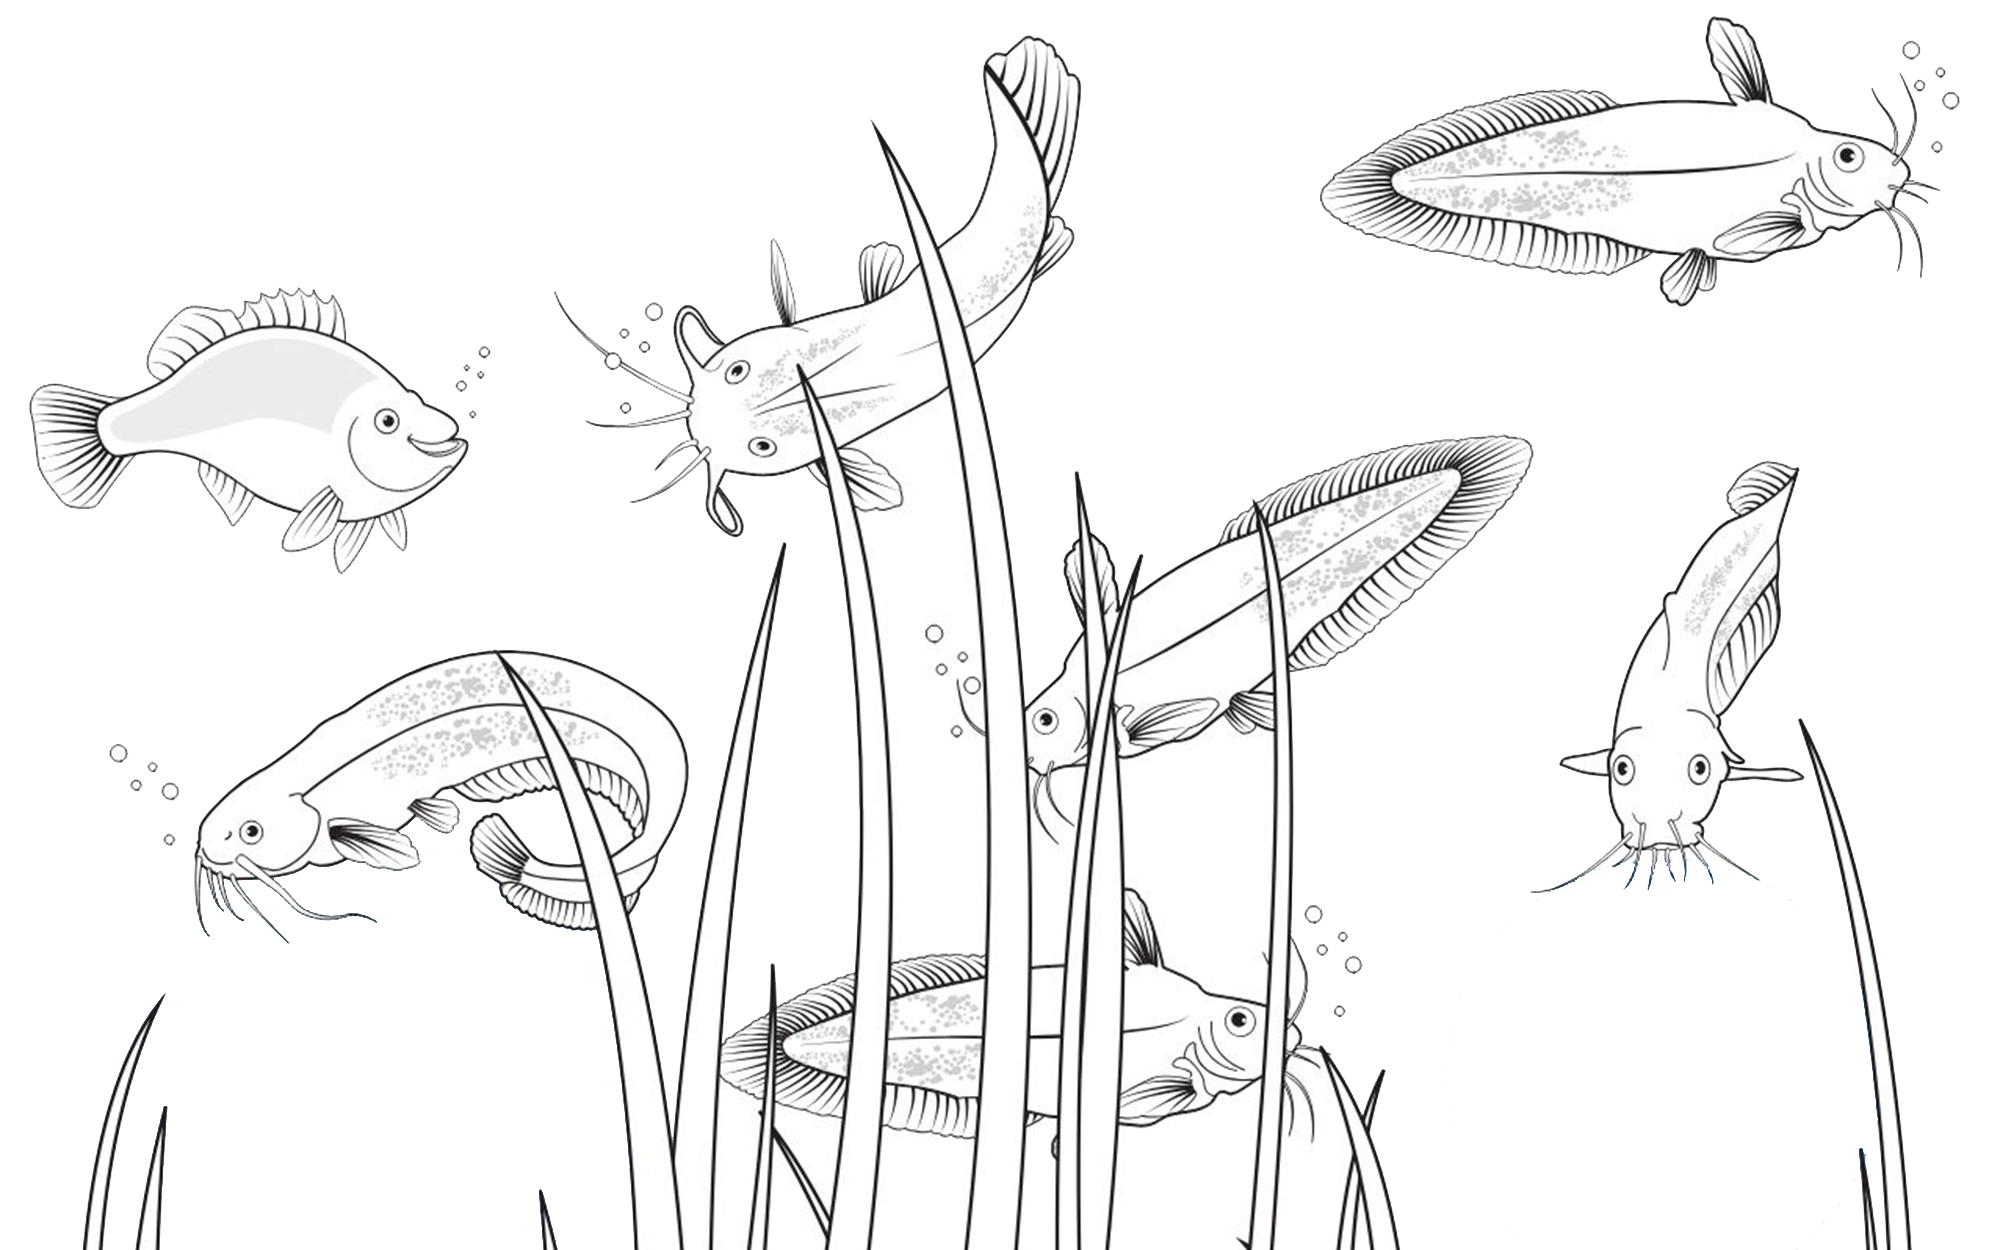 Drawing of fish among the reeds 